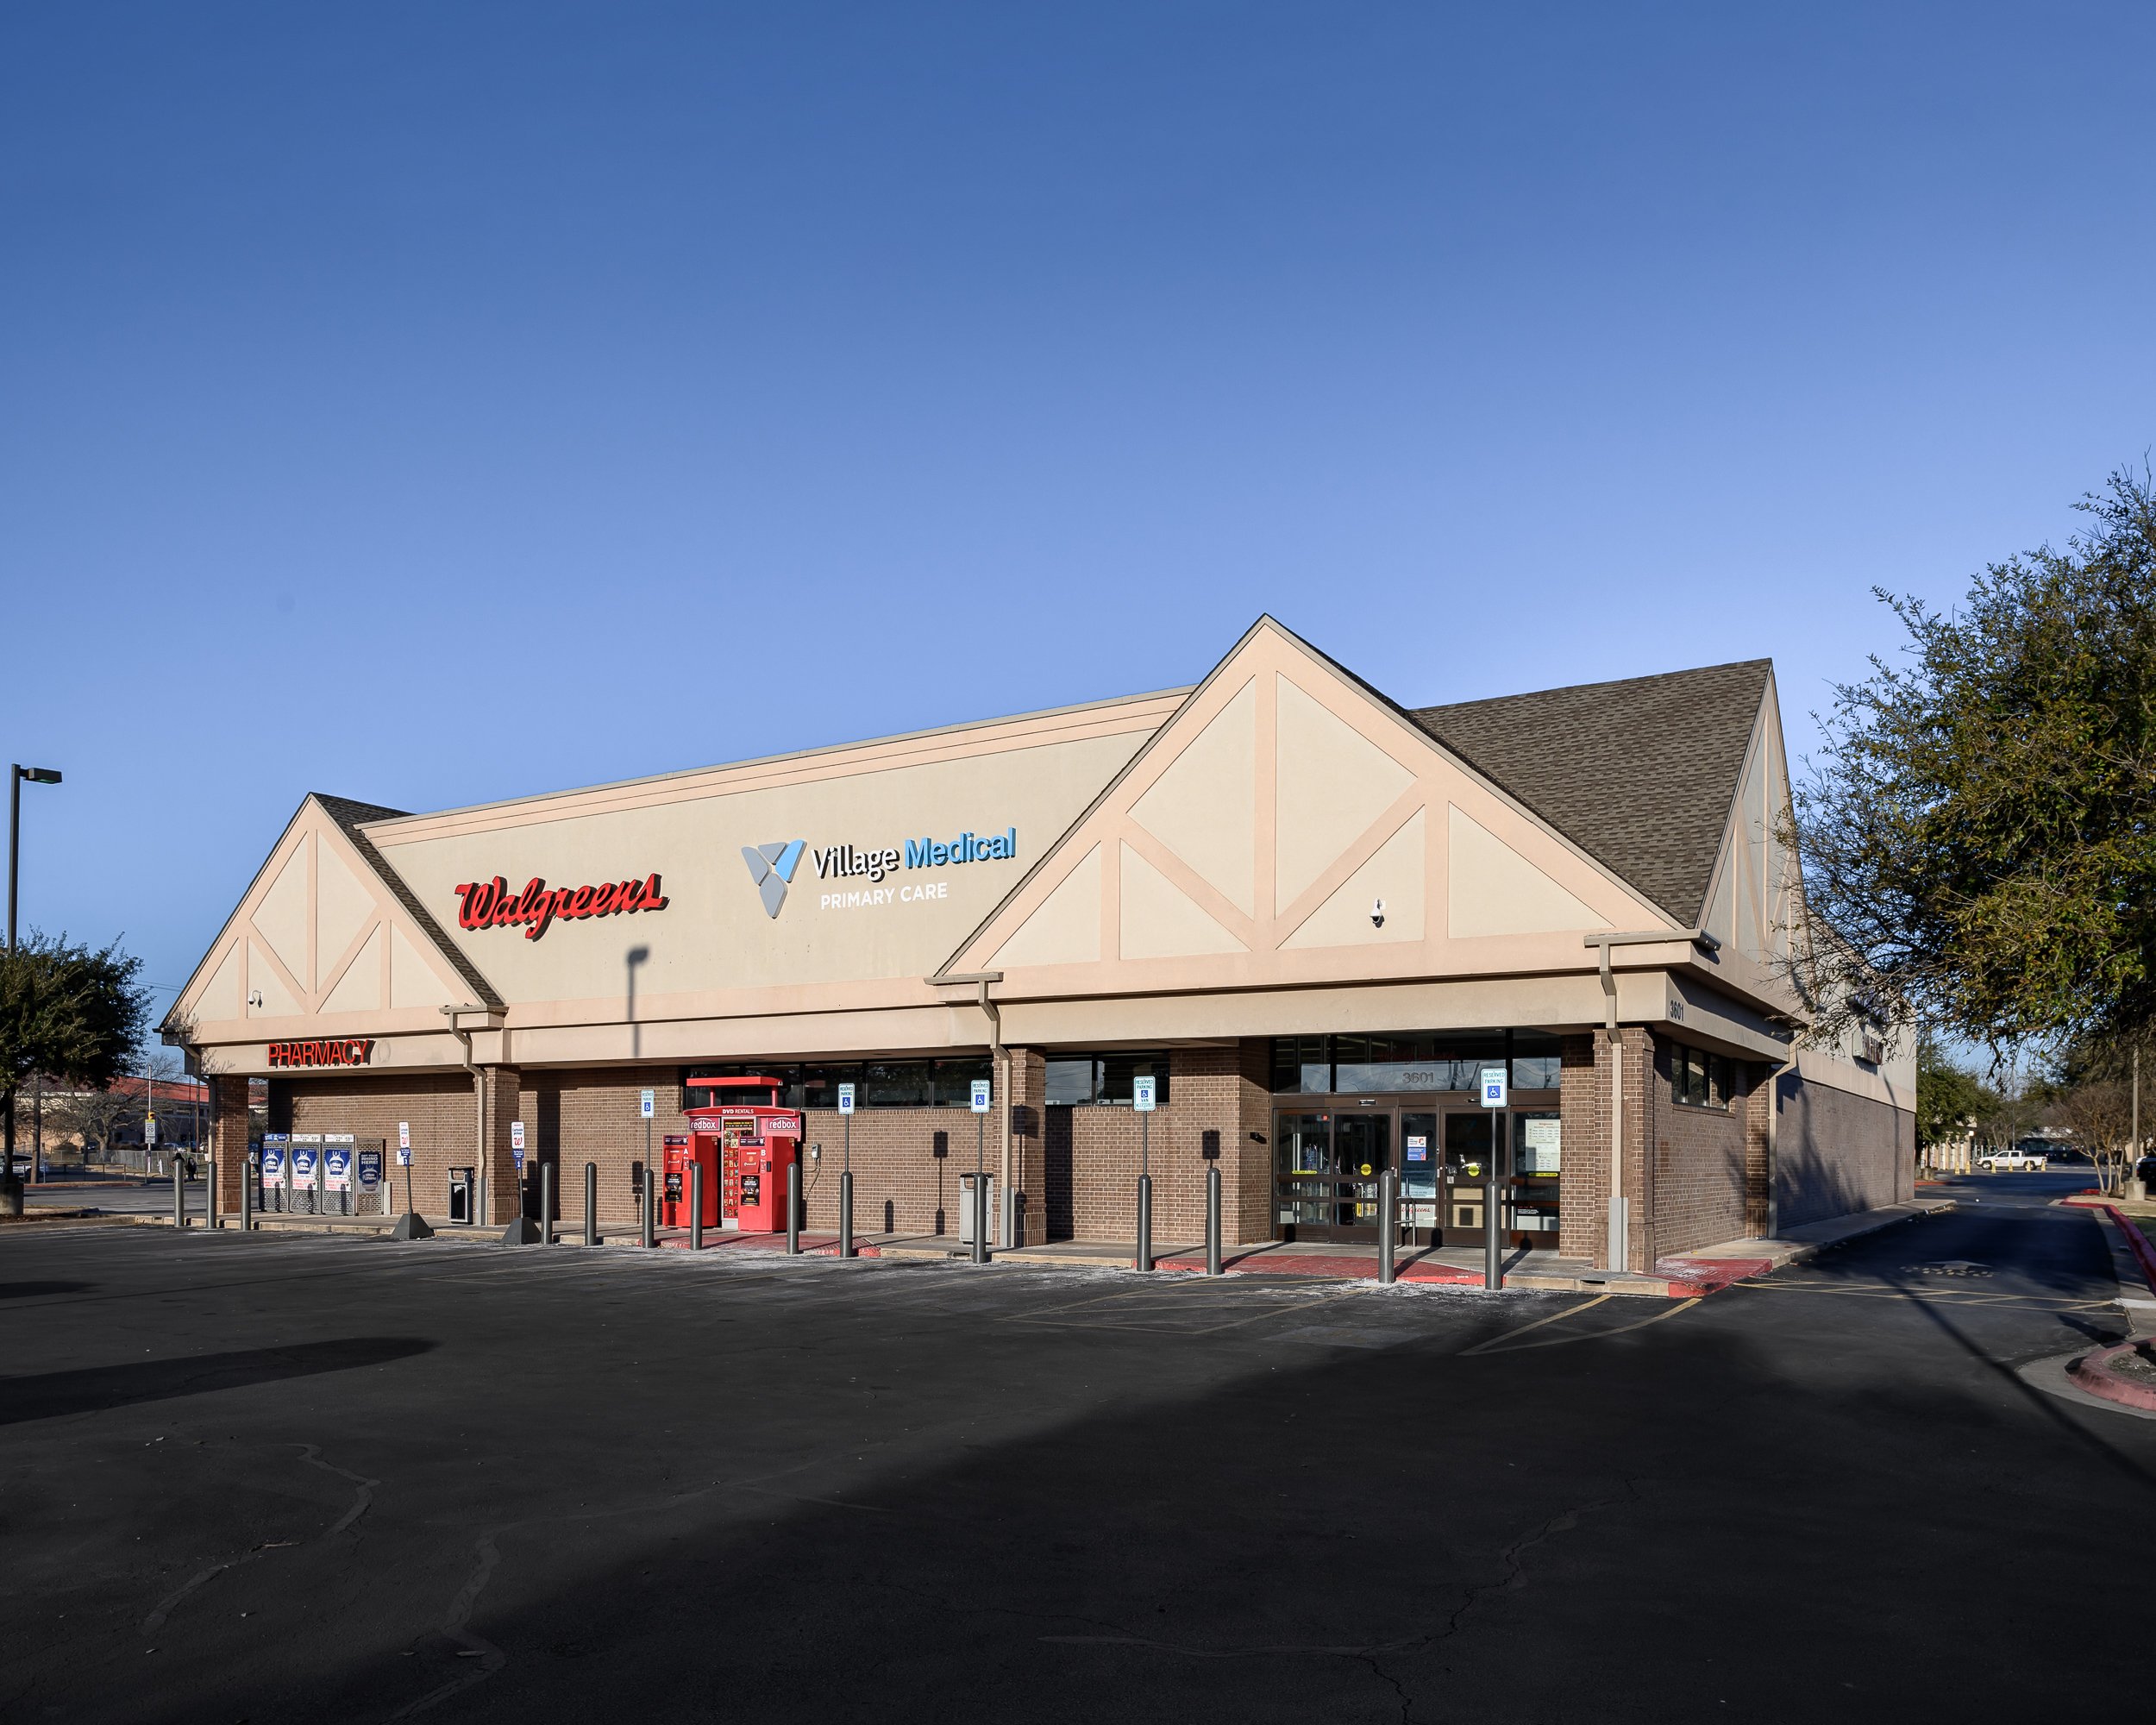 Village Medical at Walgreens - Sunset Valley -  3601 W. William Cannon Dr.,  Austin, TX, 78749.